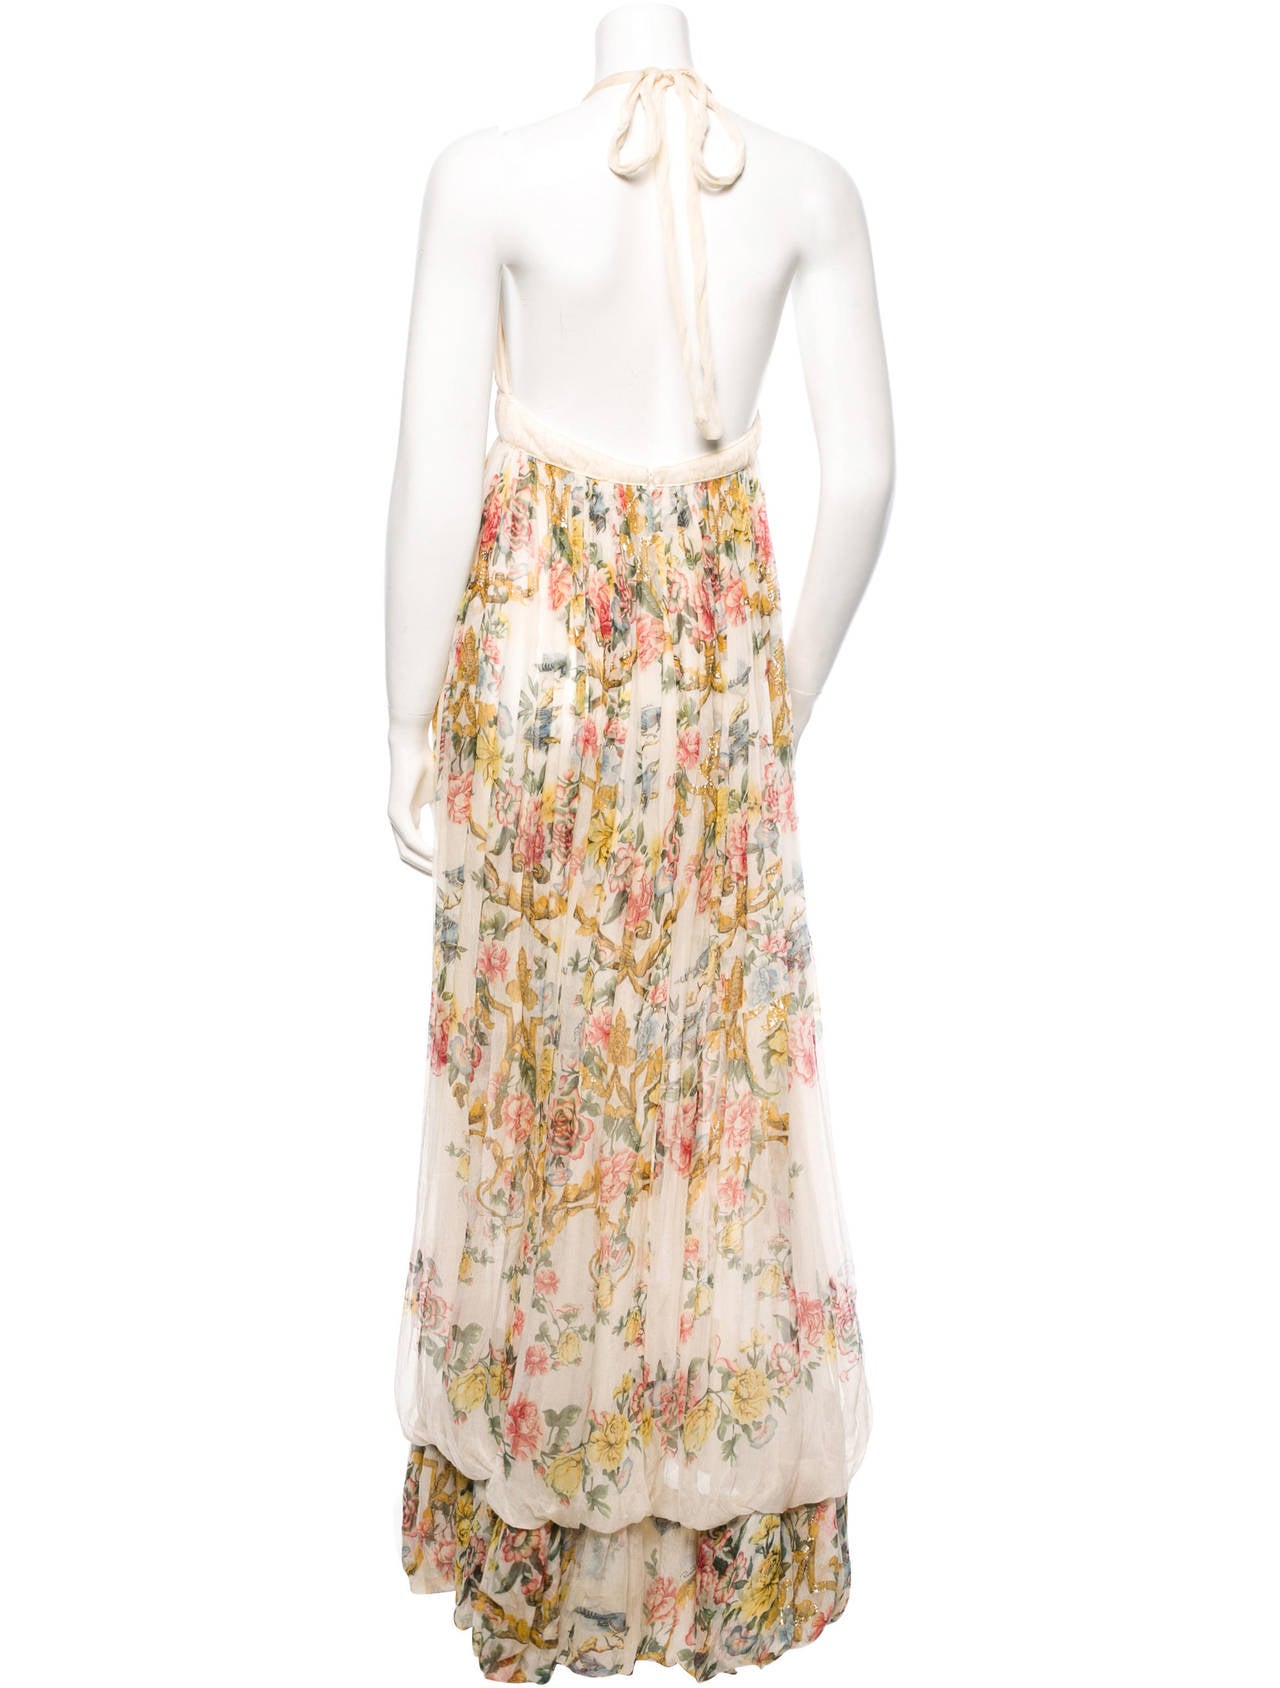 Stunning Roberto Cavalli Silk Gown In Good Condition For Sale In Bethesda, MD